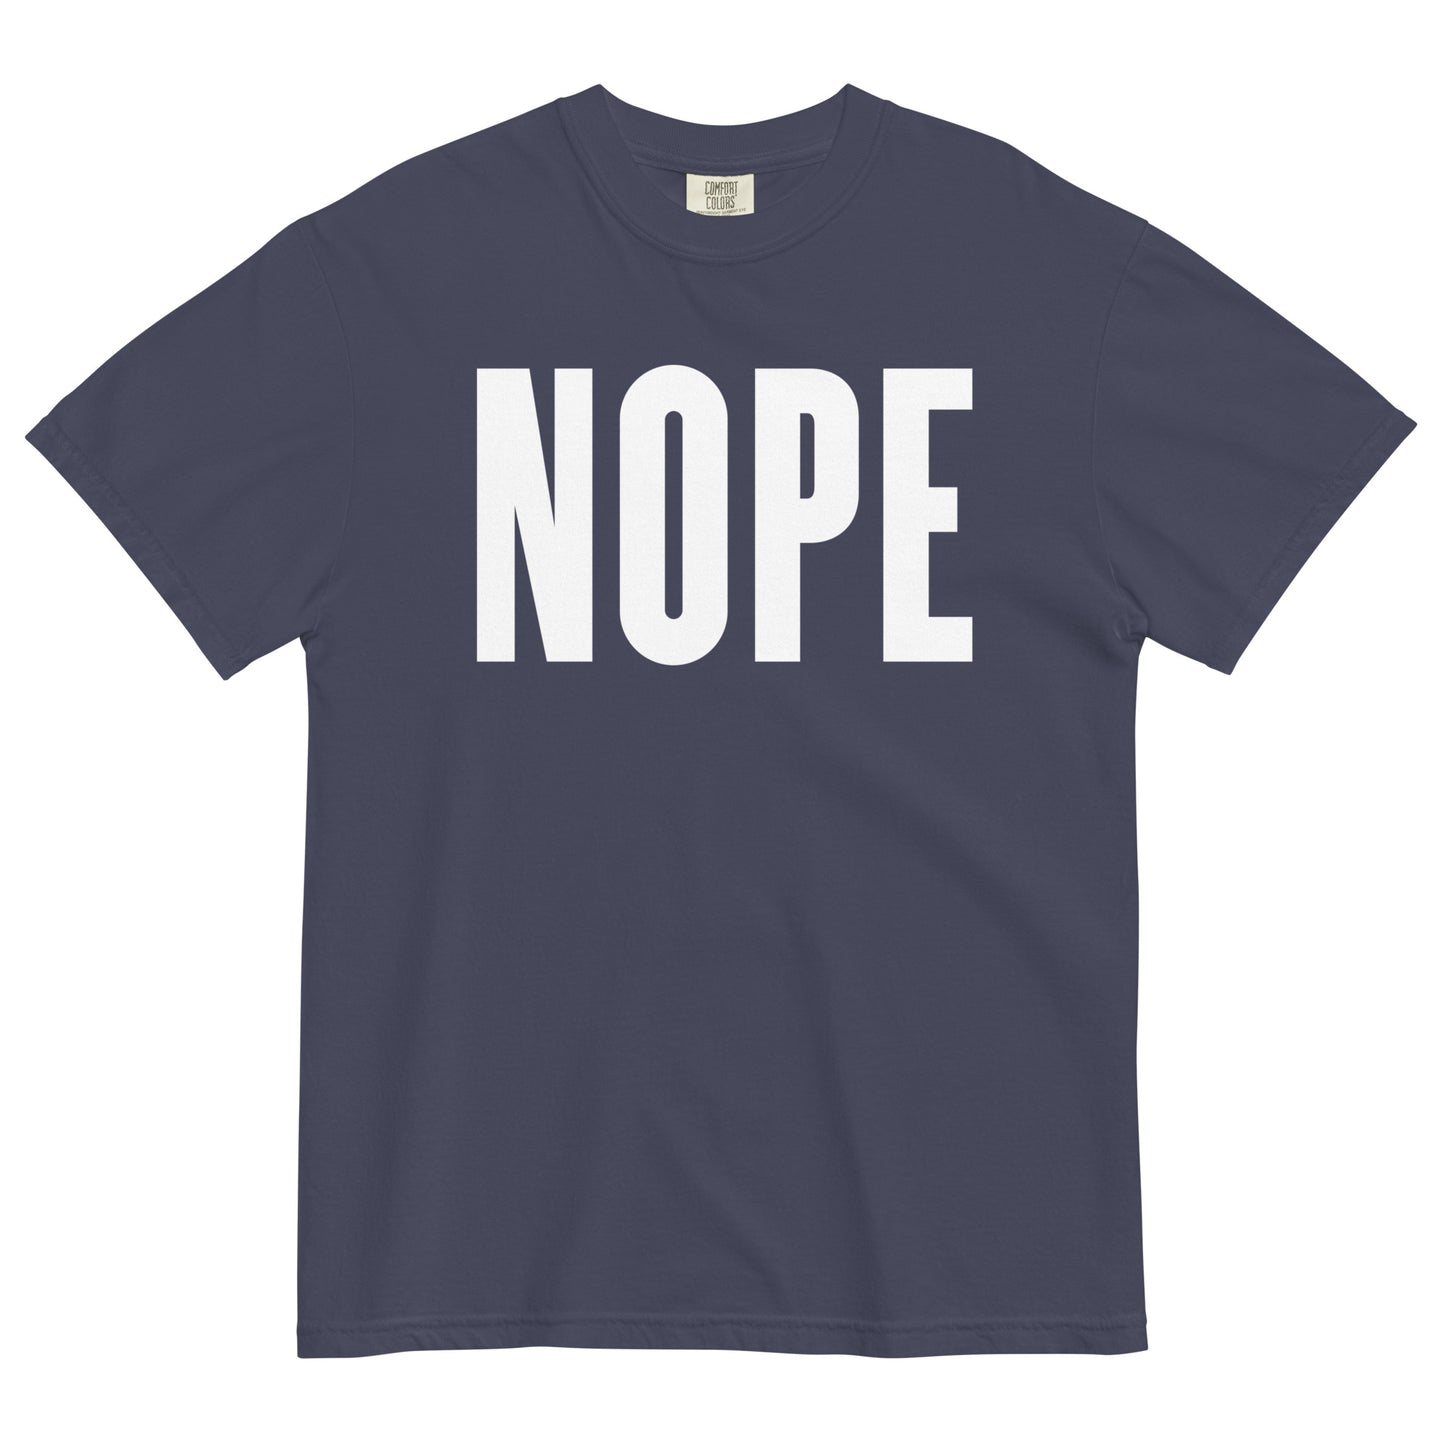 Nope Men's Relaxed Fit Tee